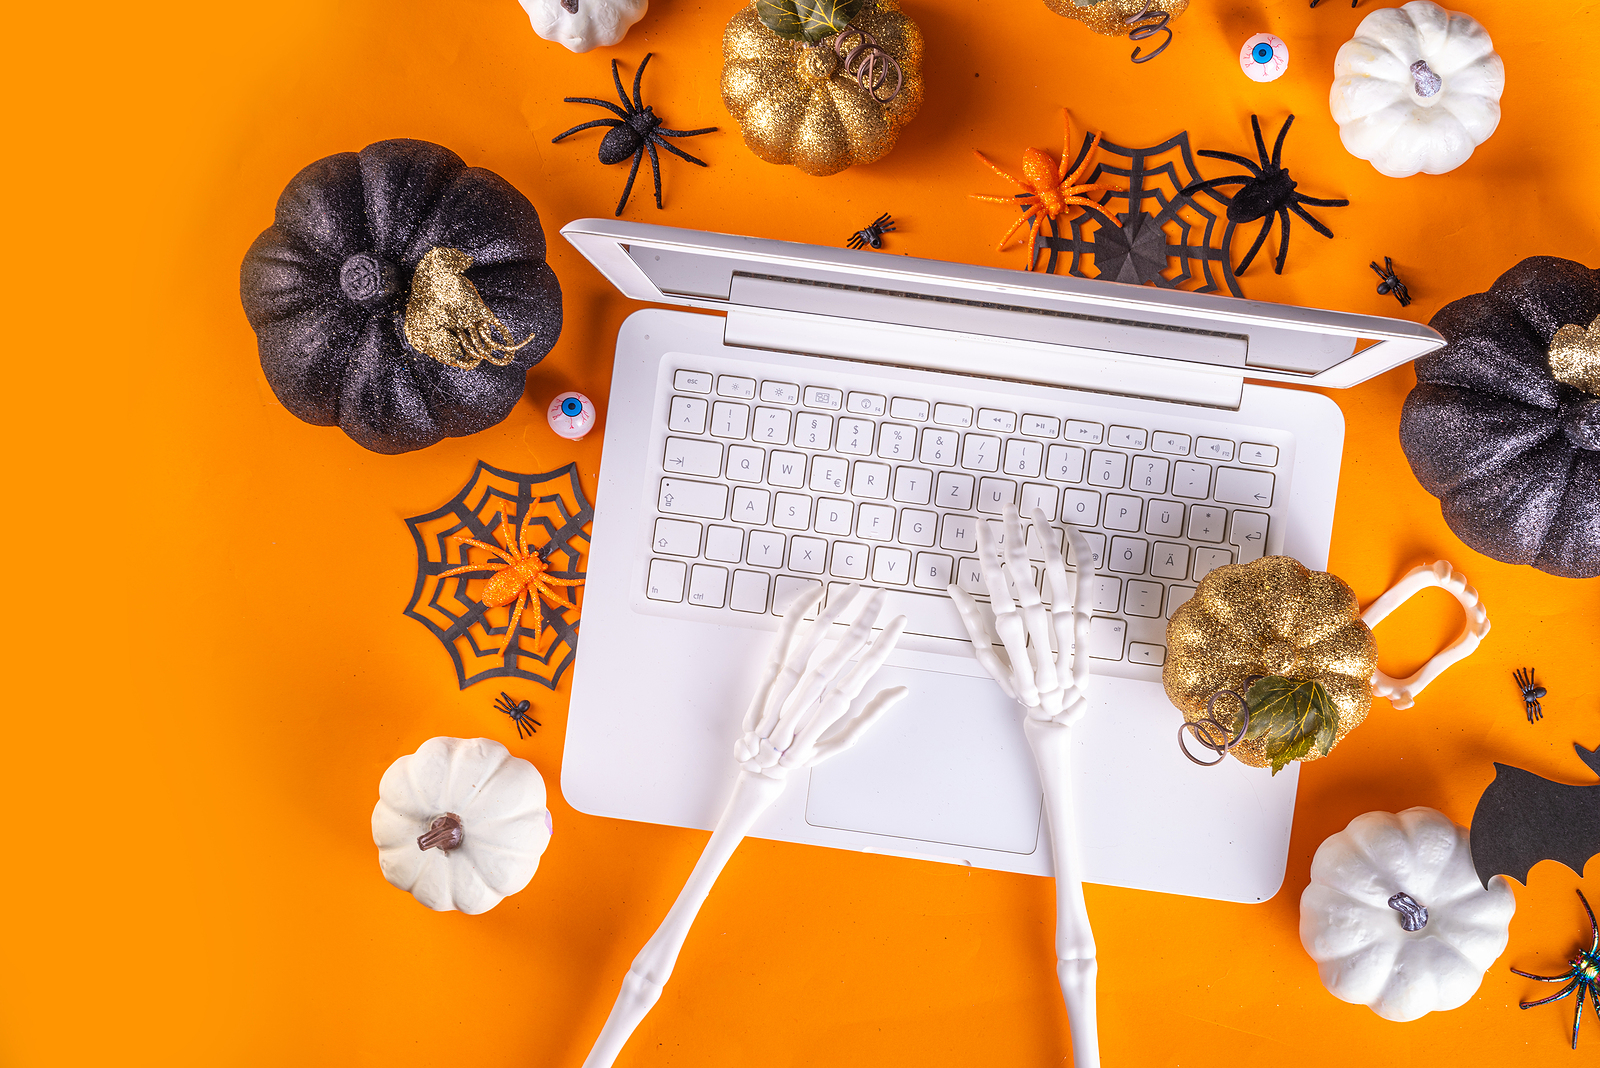 Reviewing Your Business Processes – Not as Scary as You Think